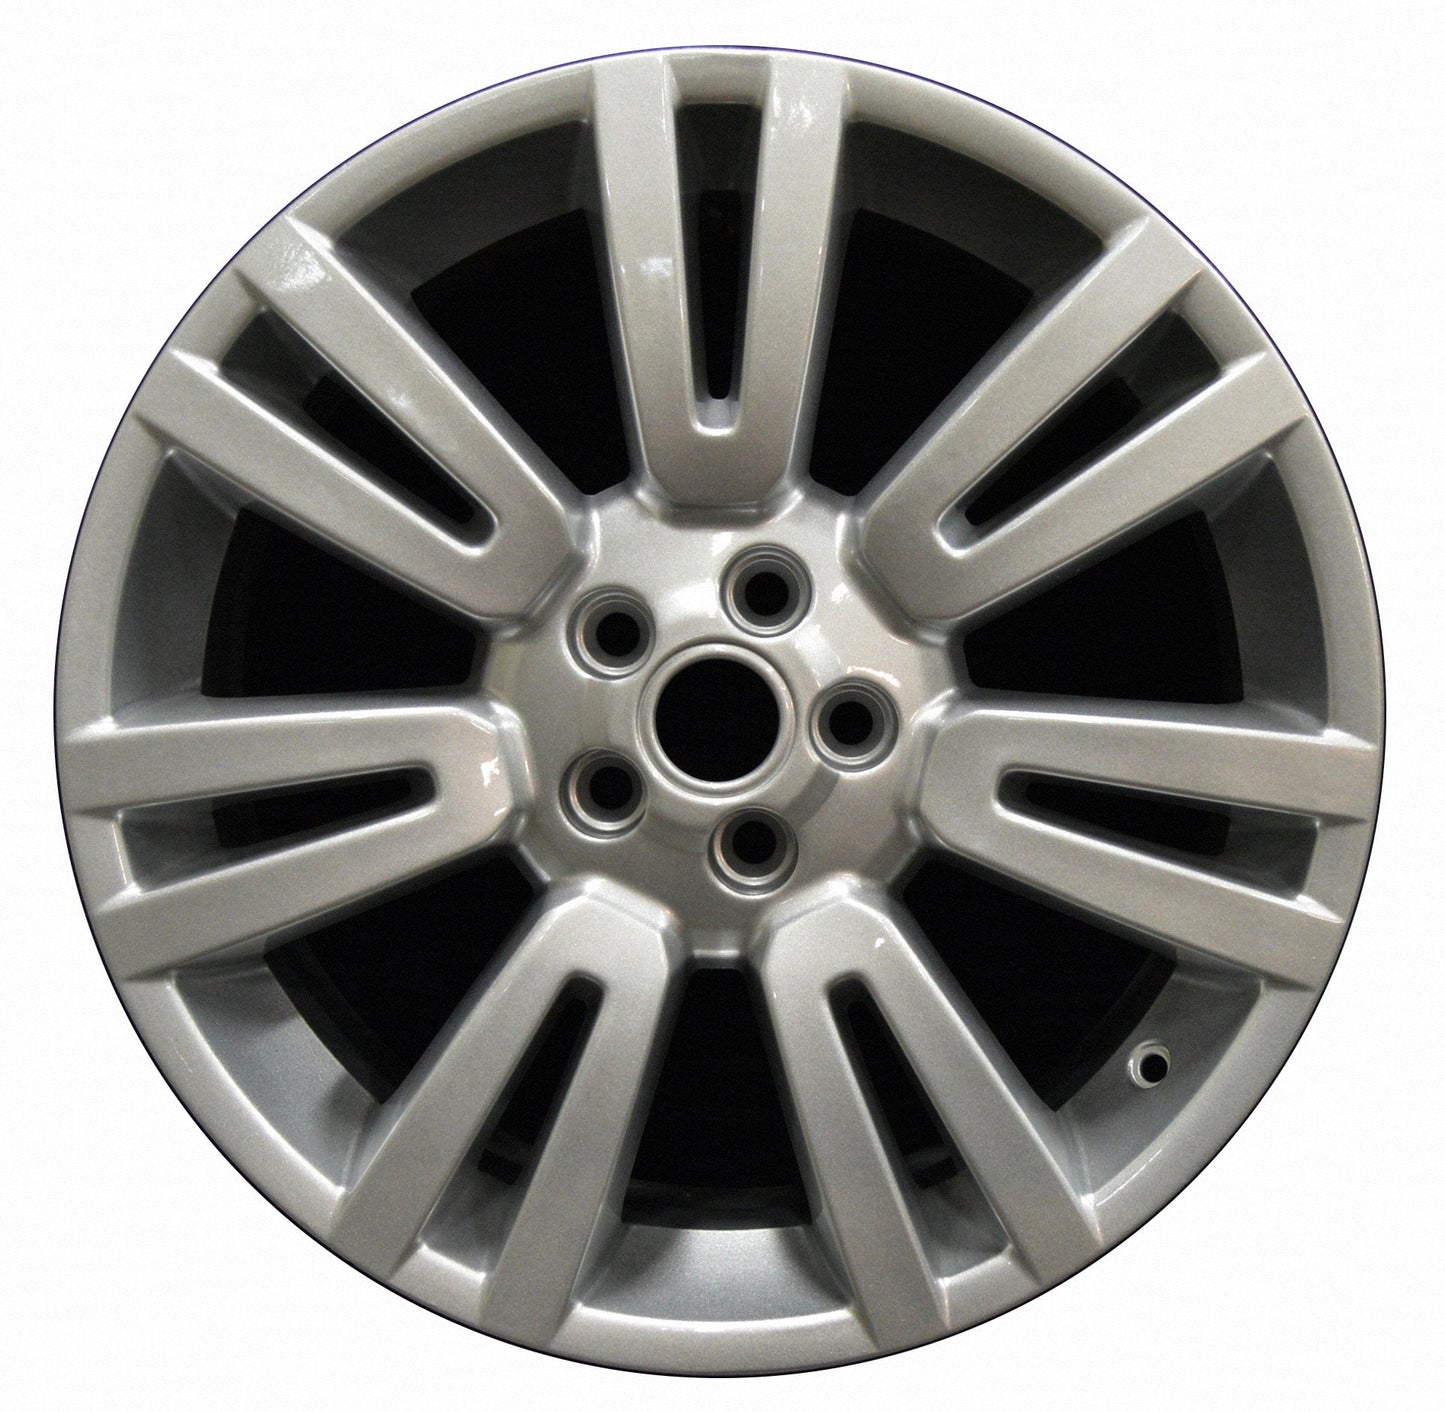 Land Rover LR2  2009, 2010, 2011, 2012, 2013, 2014, 2015 Factory OEM Car Wheel Size 19x8 Alloy WAO.72206.PS08.FF